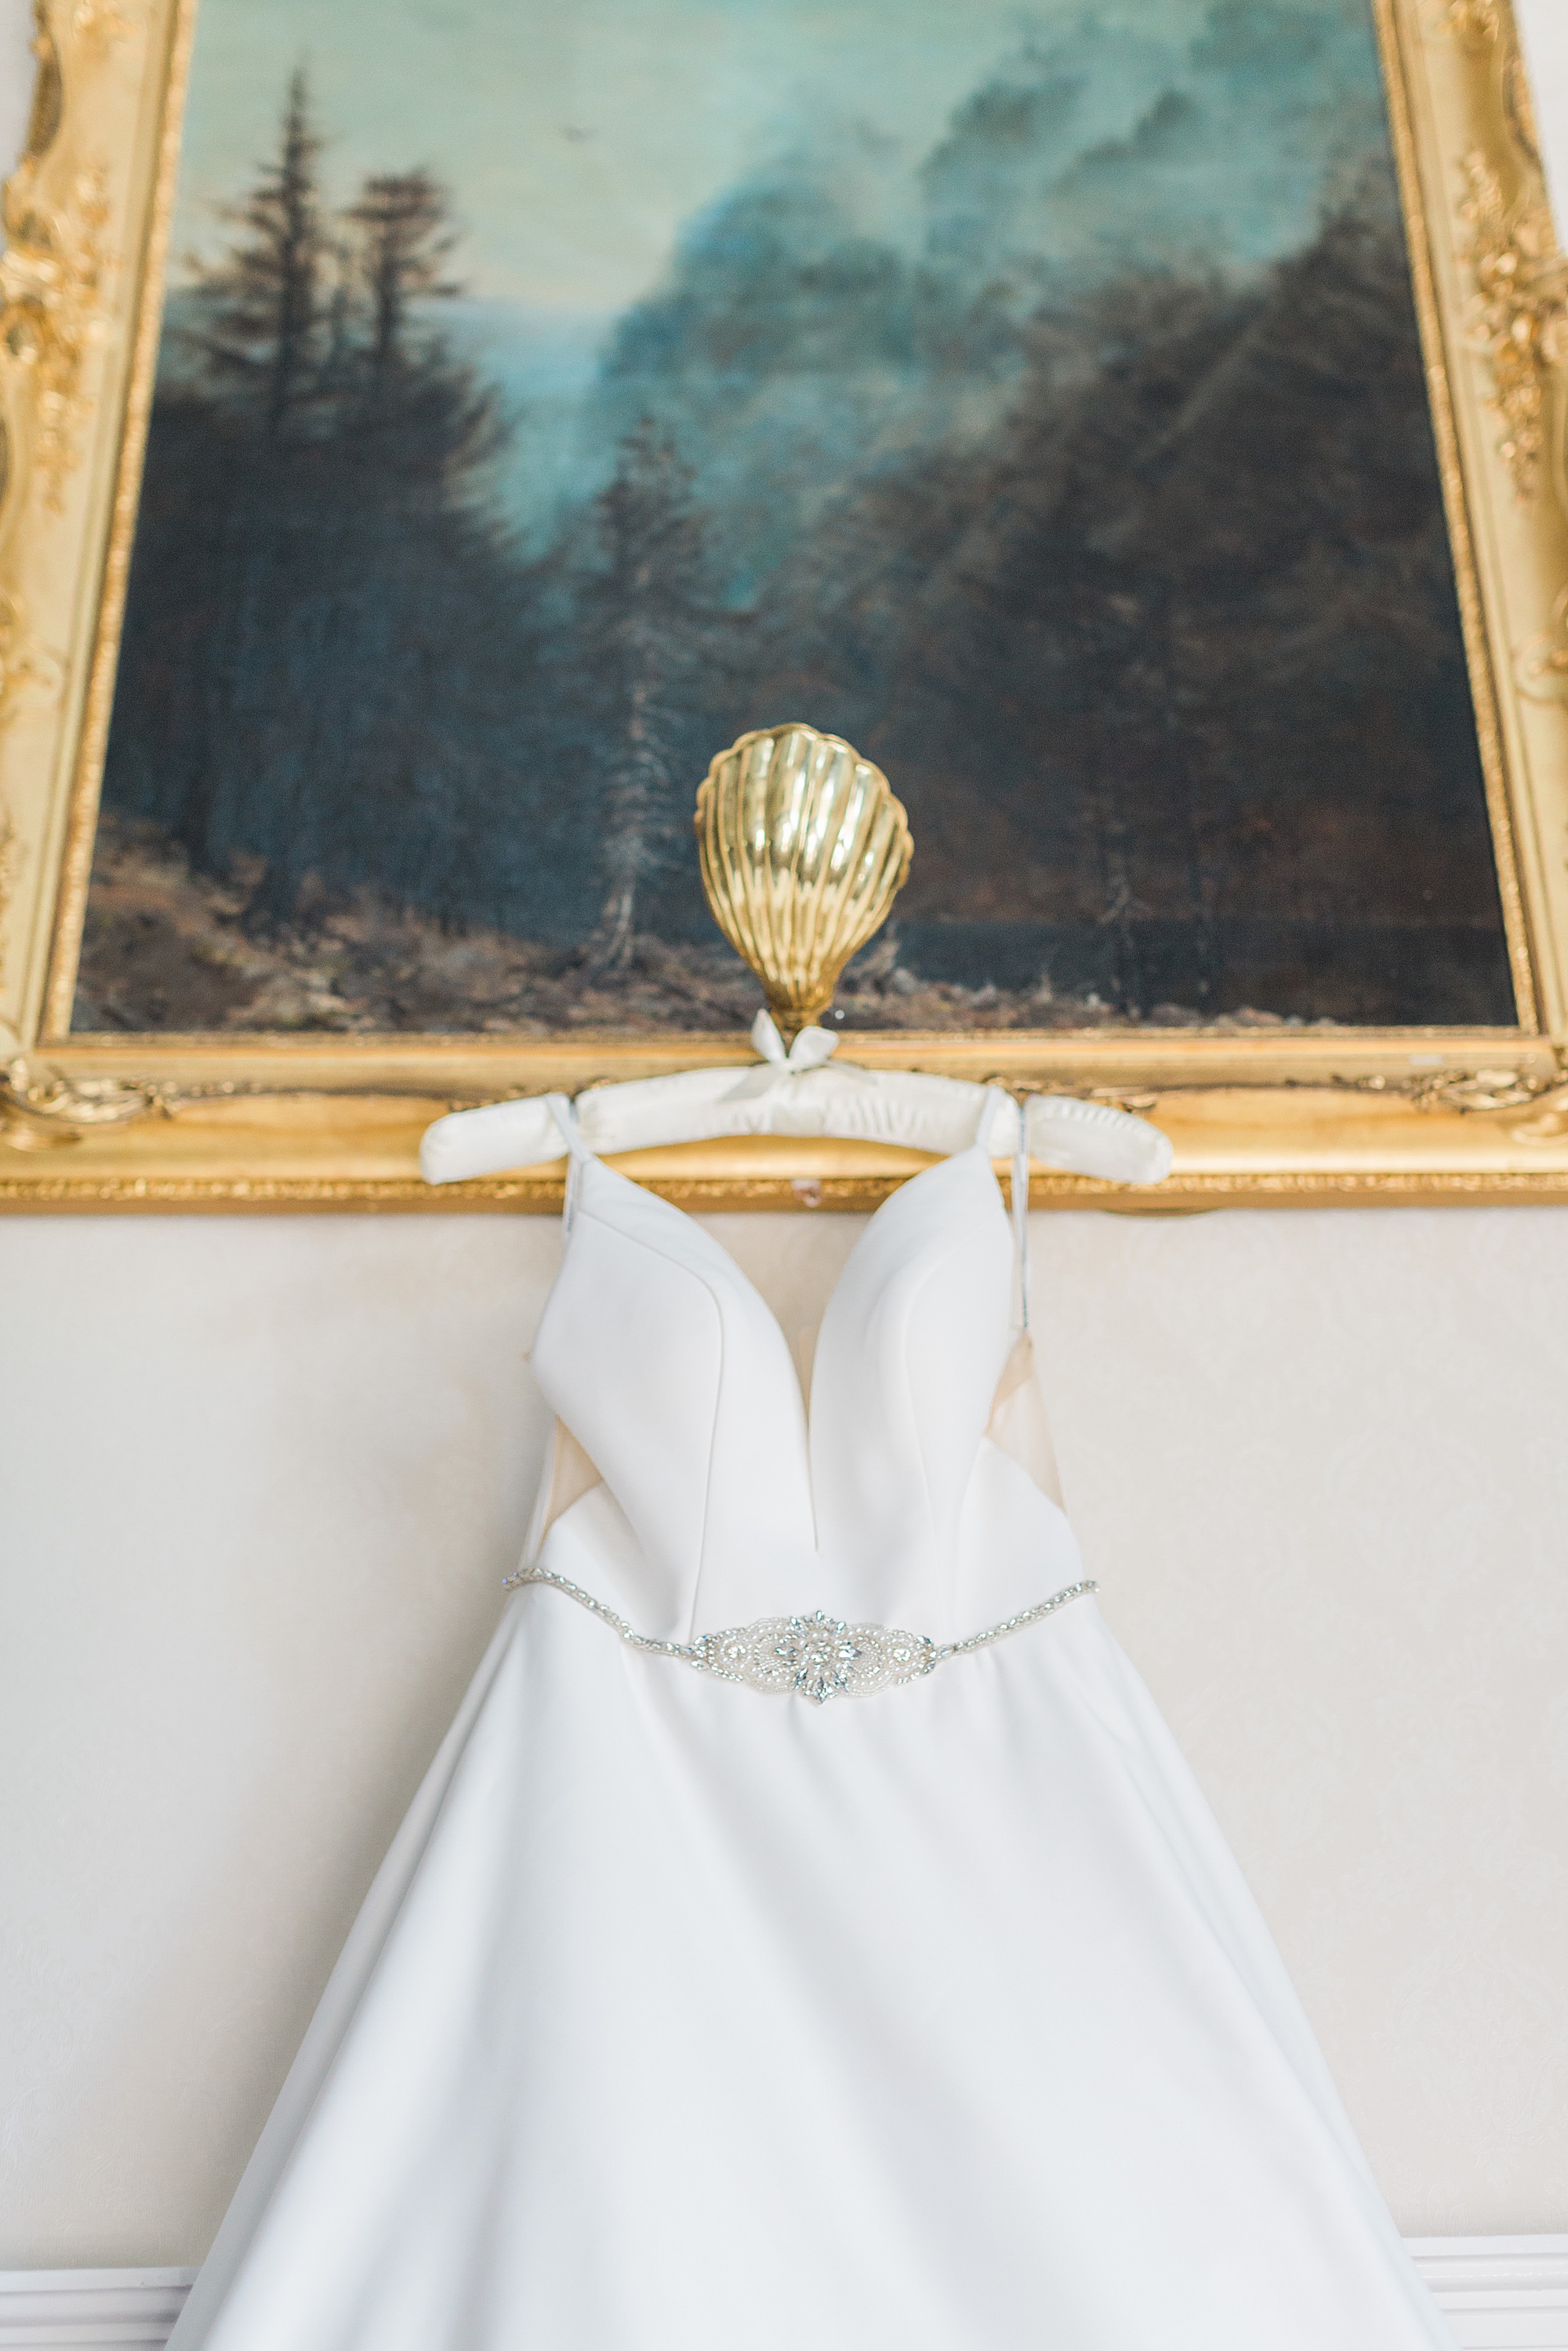 photo of a wedding dress hung from a gold frame against a wall at grafton manor bromsgrove, the dress has jewel detail to a belt 